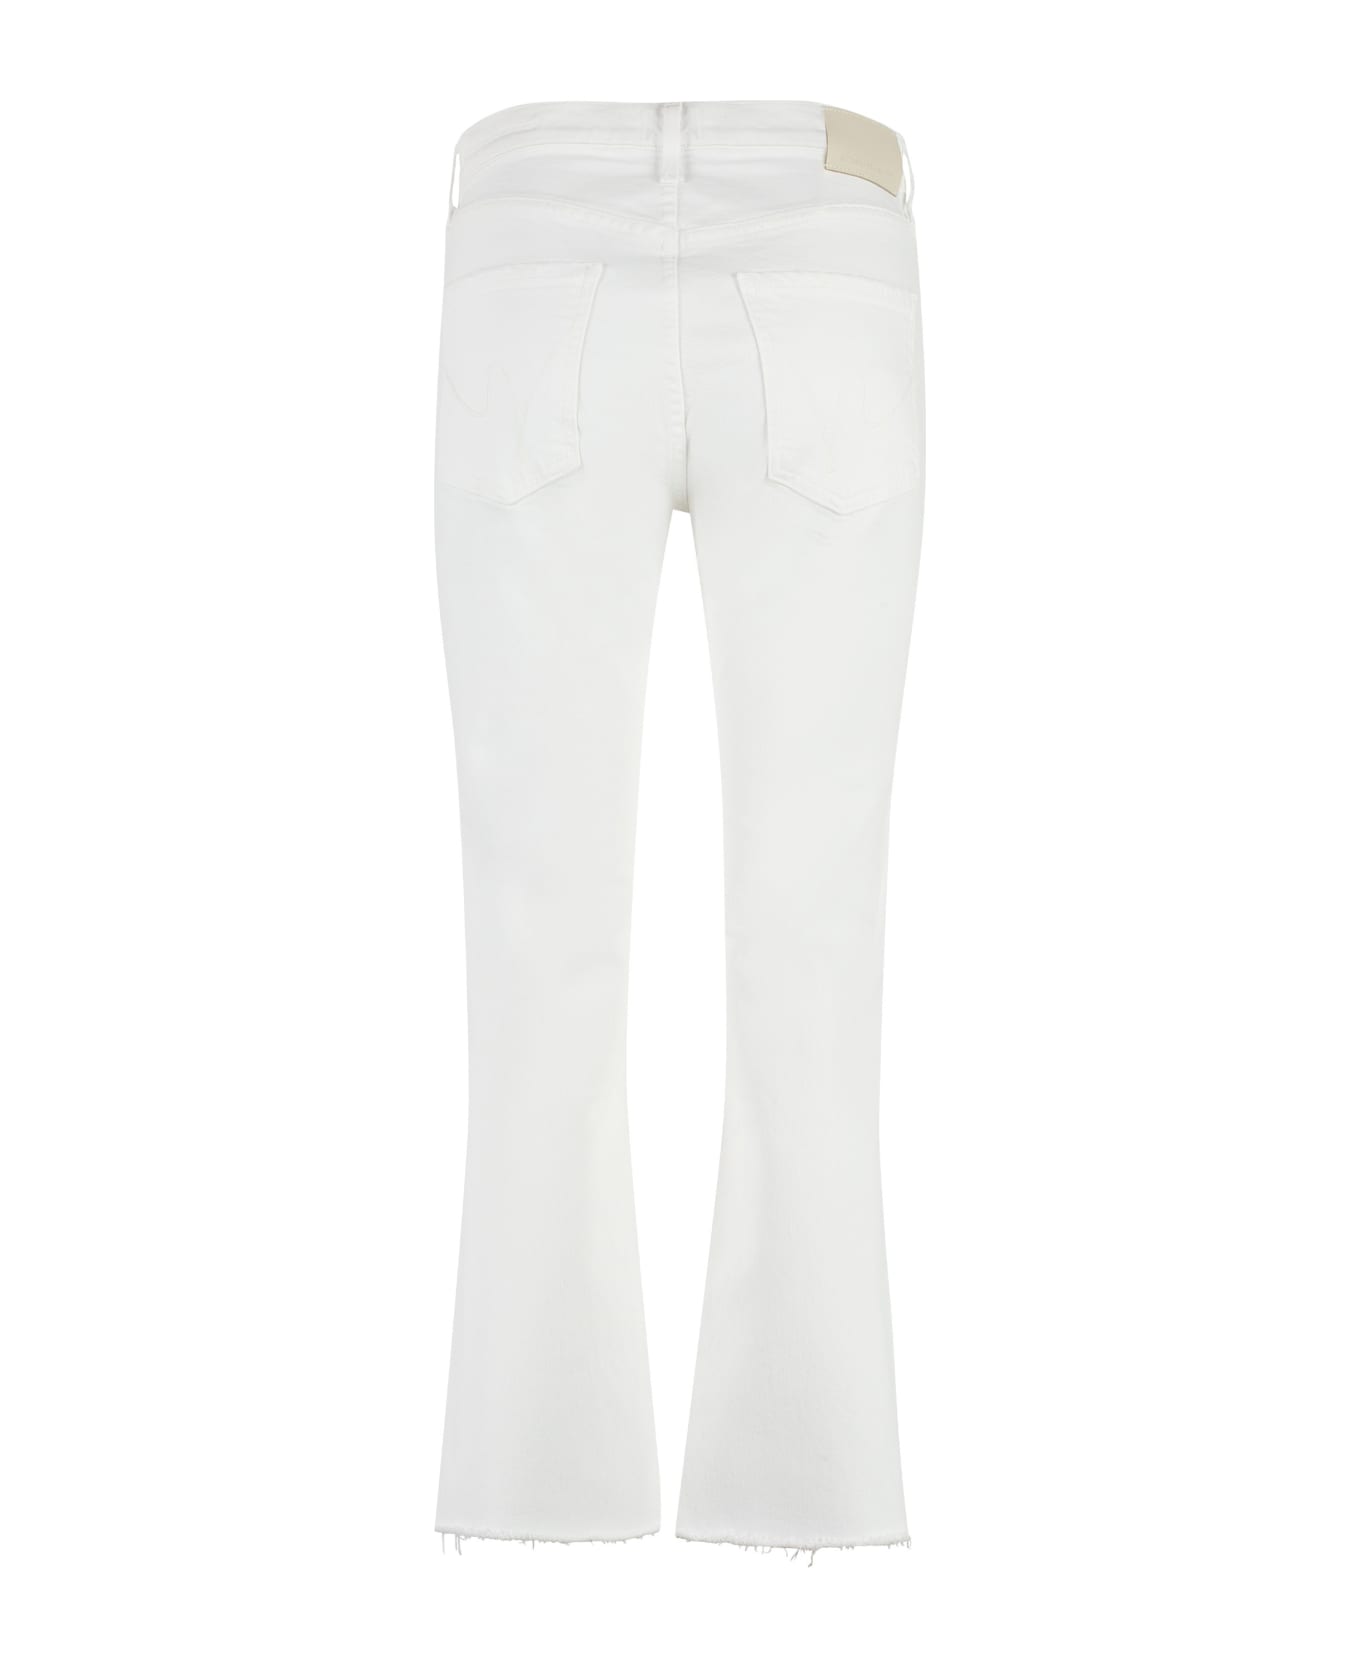 Citizens of Humanity Cropped Jeans - White